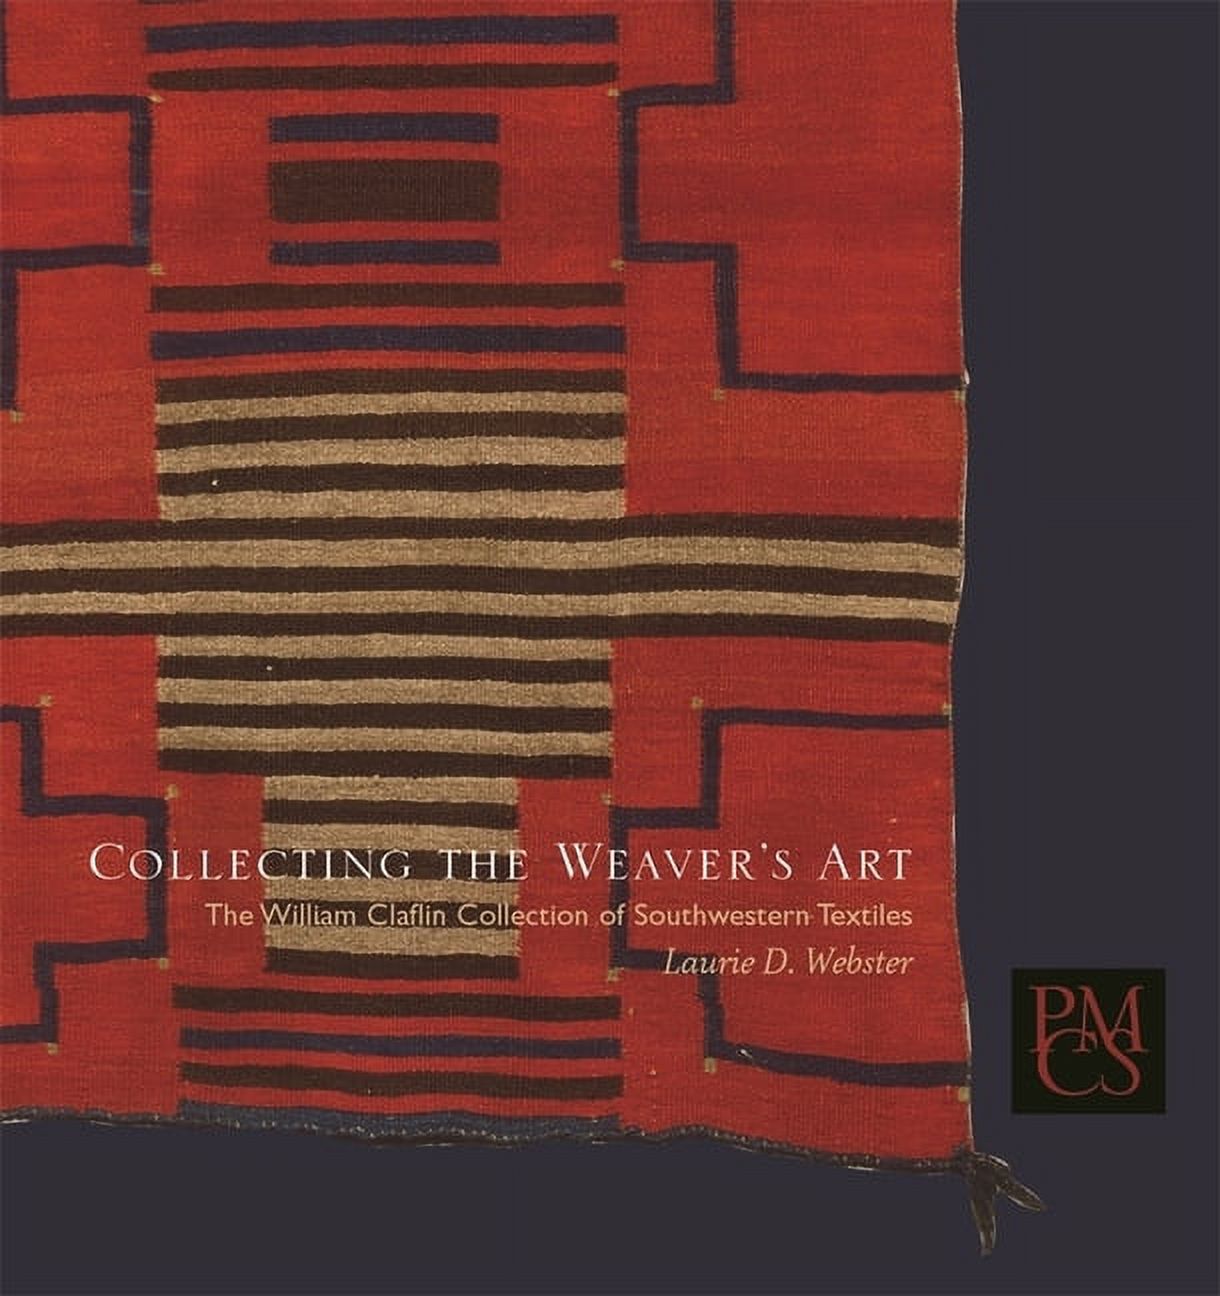 Peabody Museum Collections: Collecting the Weaver's Art: The William Claflin Collection of Southwestern Textiles (Paperback) - image 1 of 1